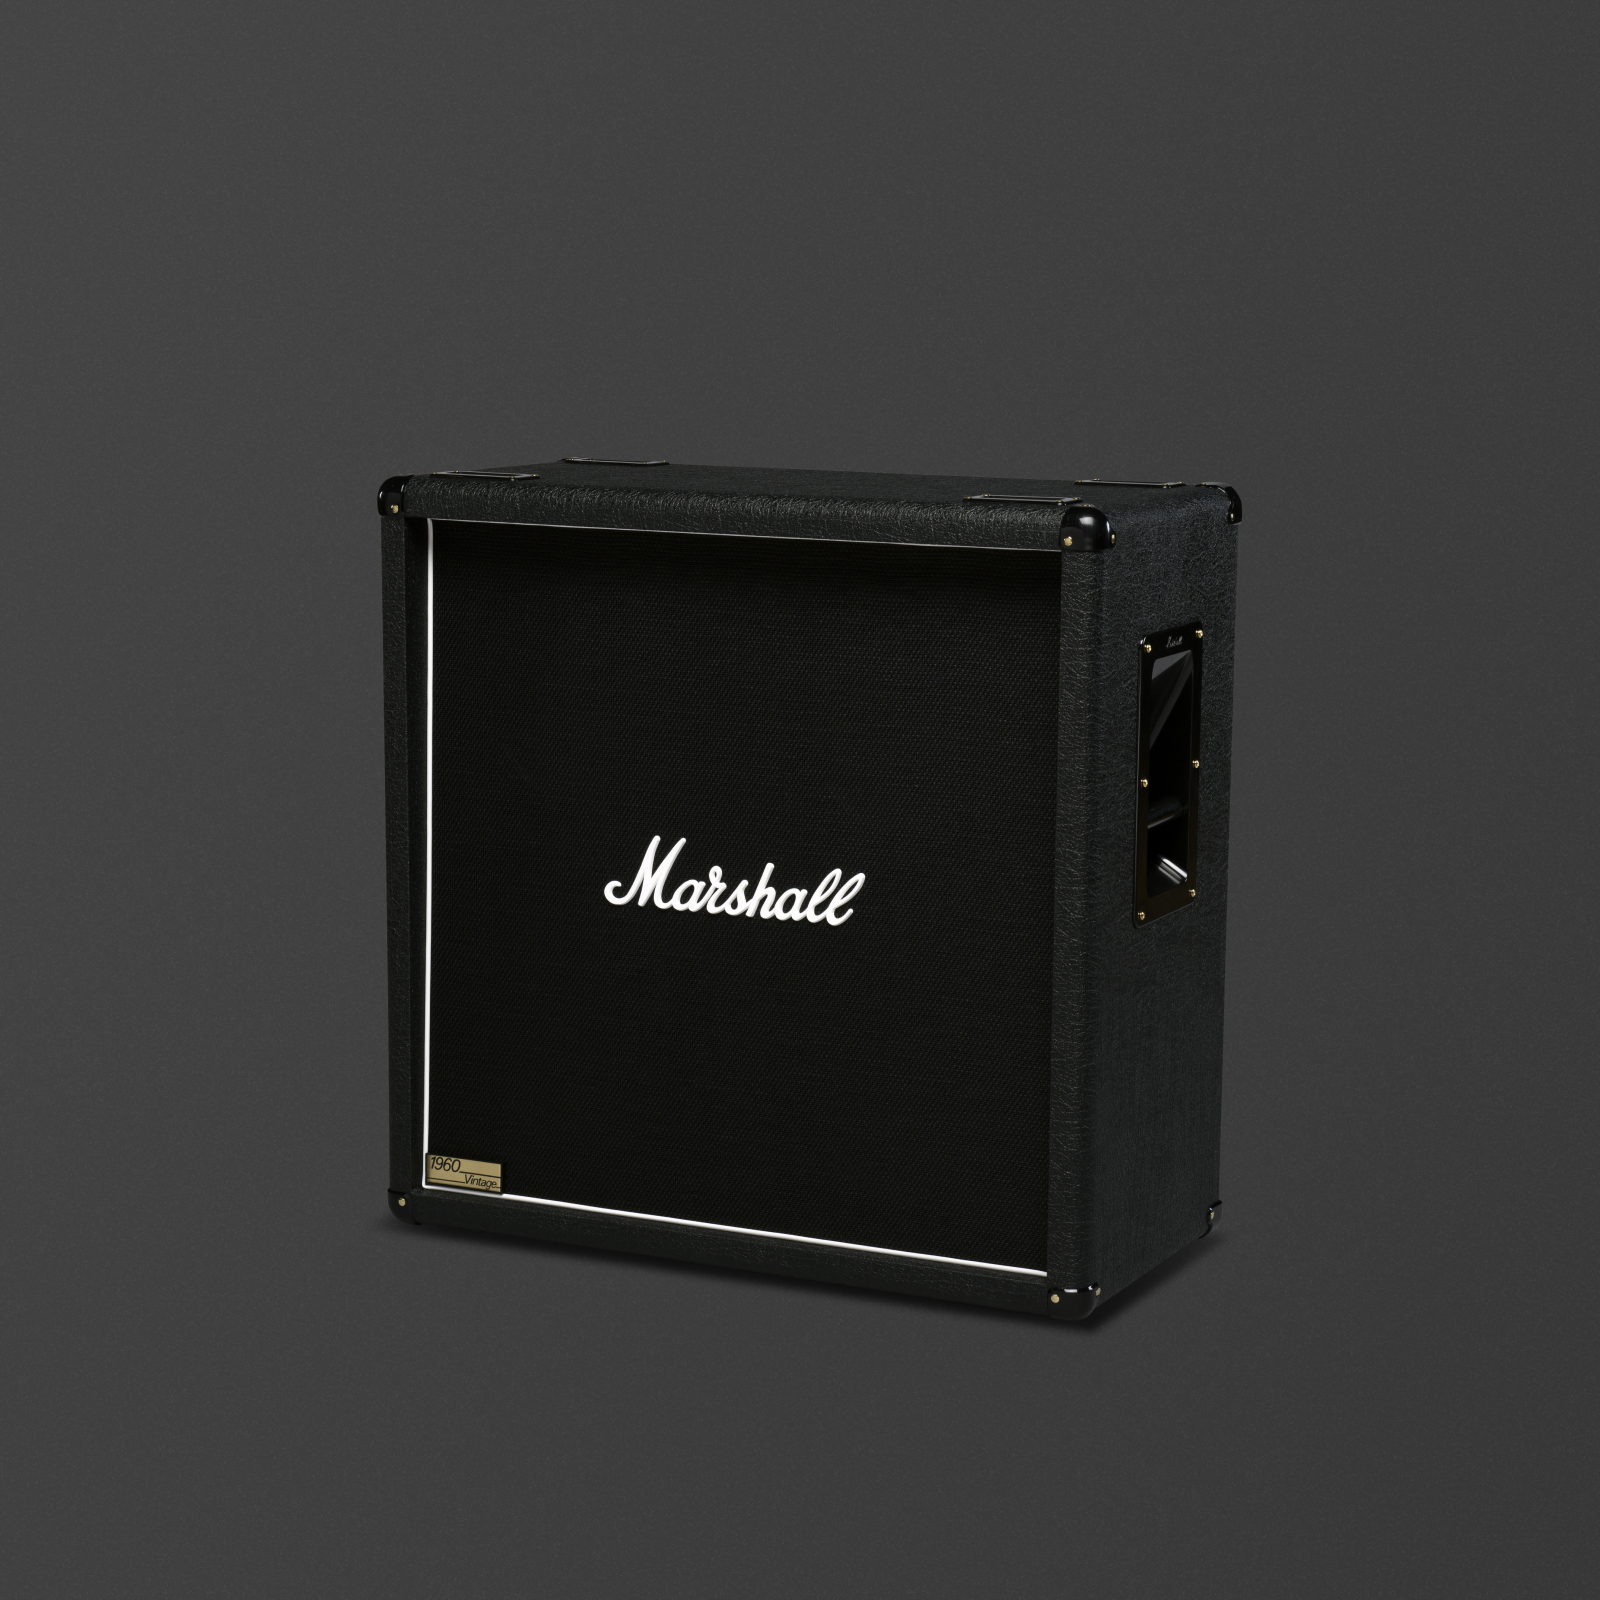 Marshall's 1960BV cabinet in vintage style.  